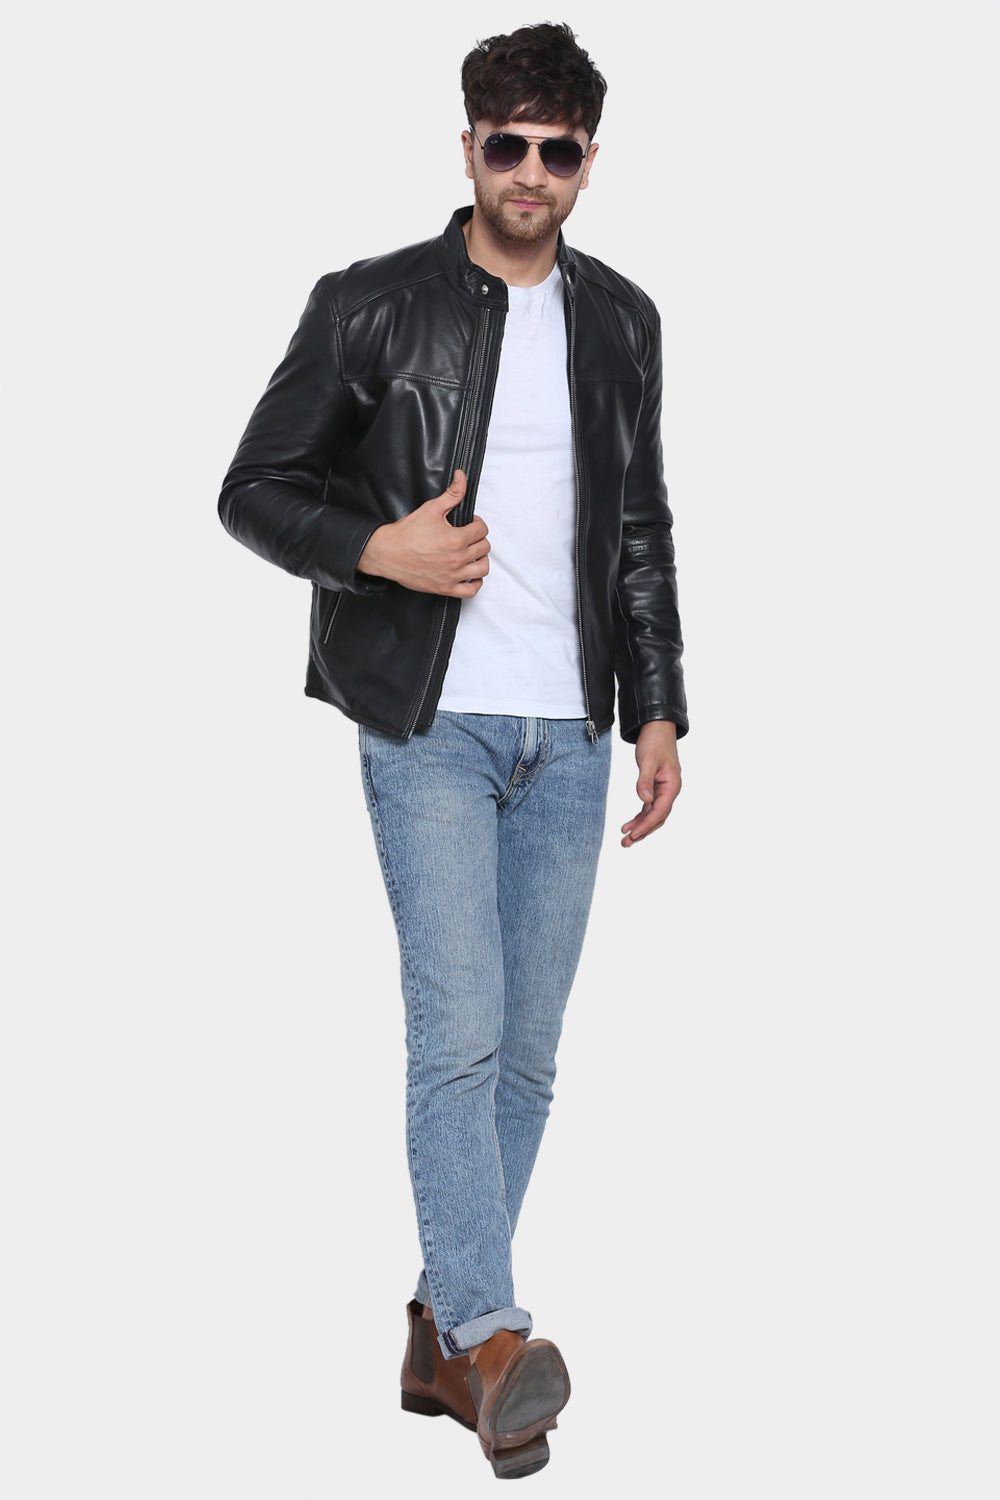 Justanned Ashed Leather Jacket